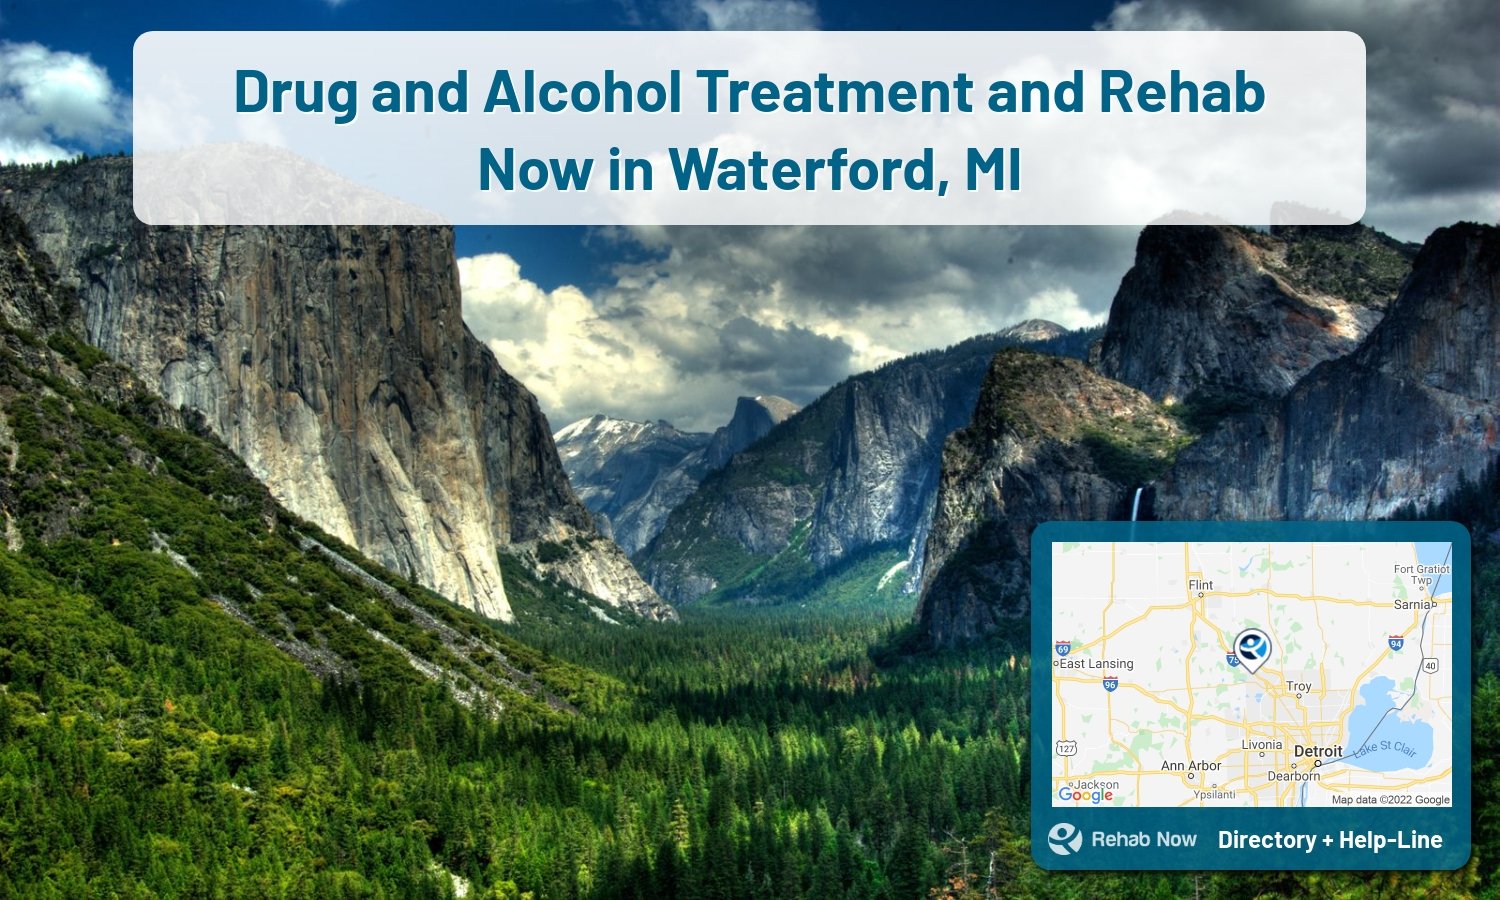 Waterford, MI Treatment Centers. Find drug rehab in Waterford, Michigan, or detox and treatment programs. Get the right help now!